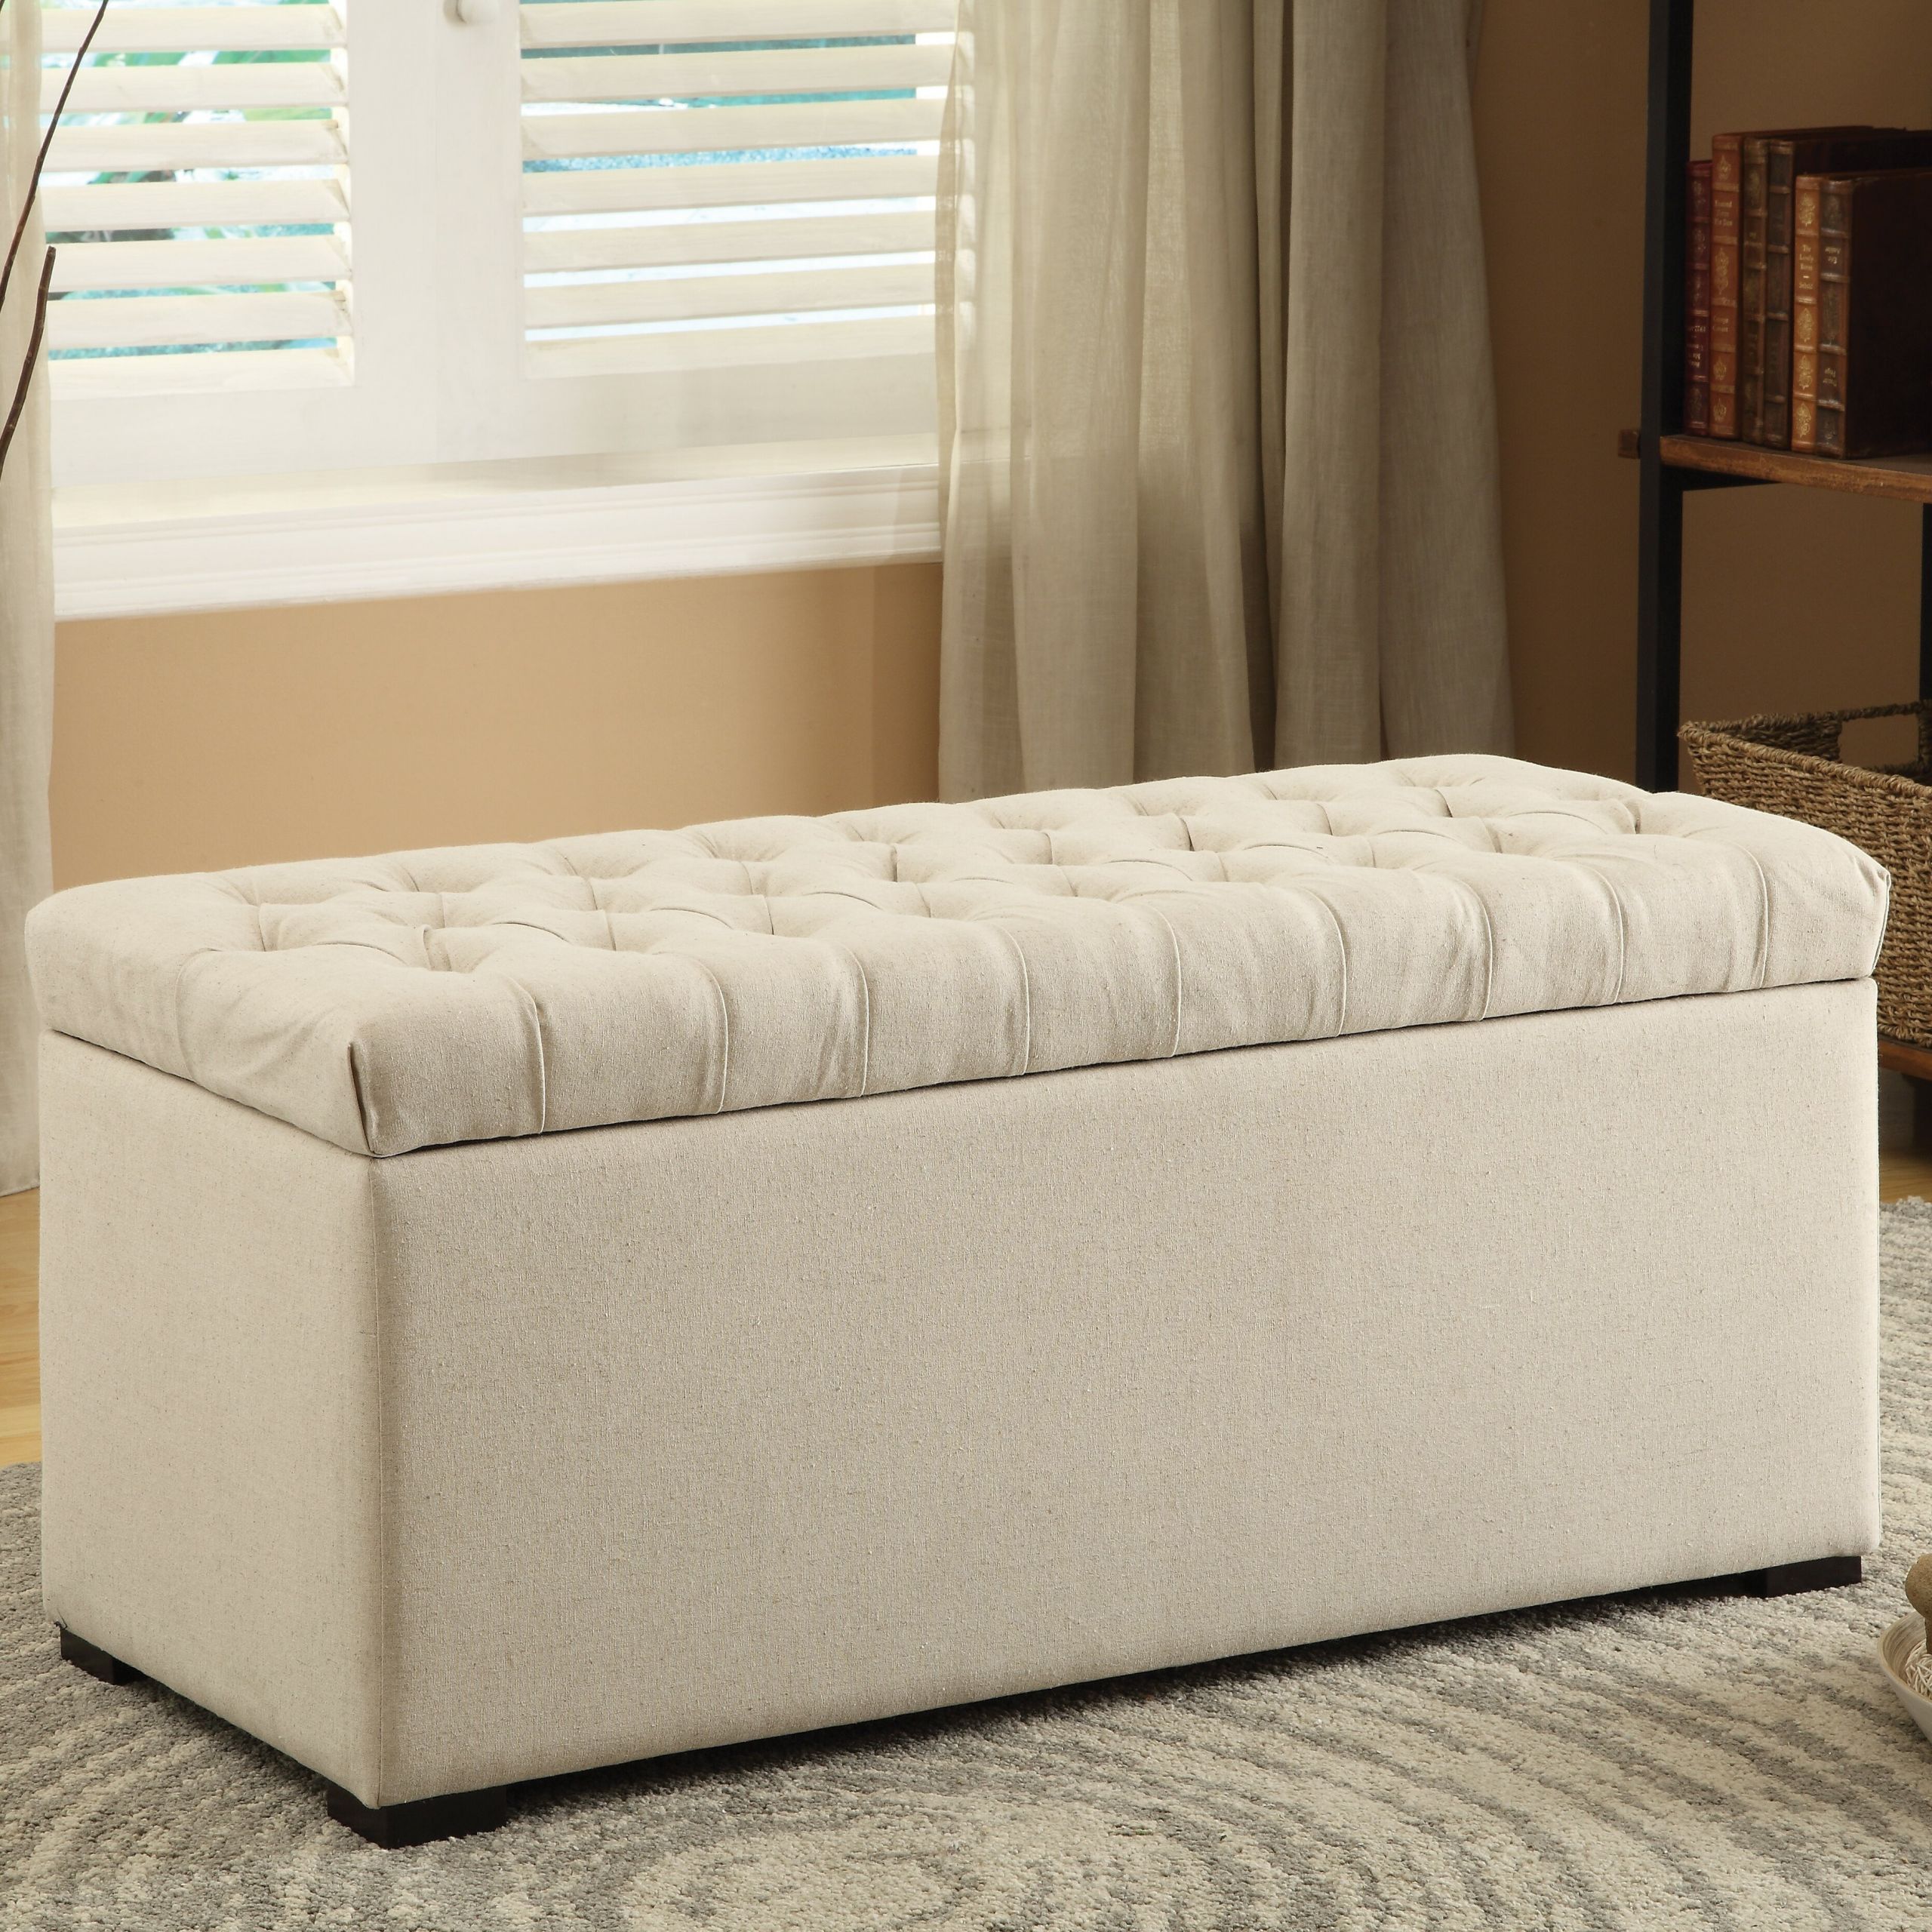 Storage Benches For Bedroom
 Charlton Home Taunton e Seat Wood Storage Bedroom Bench